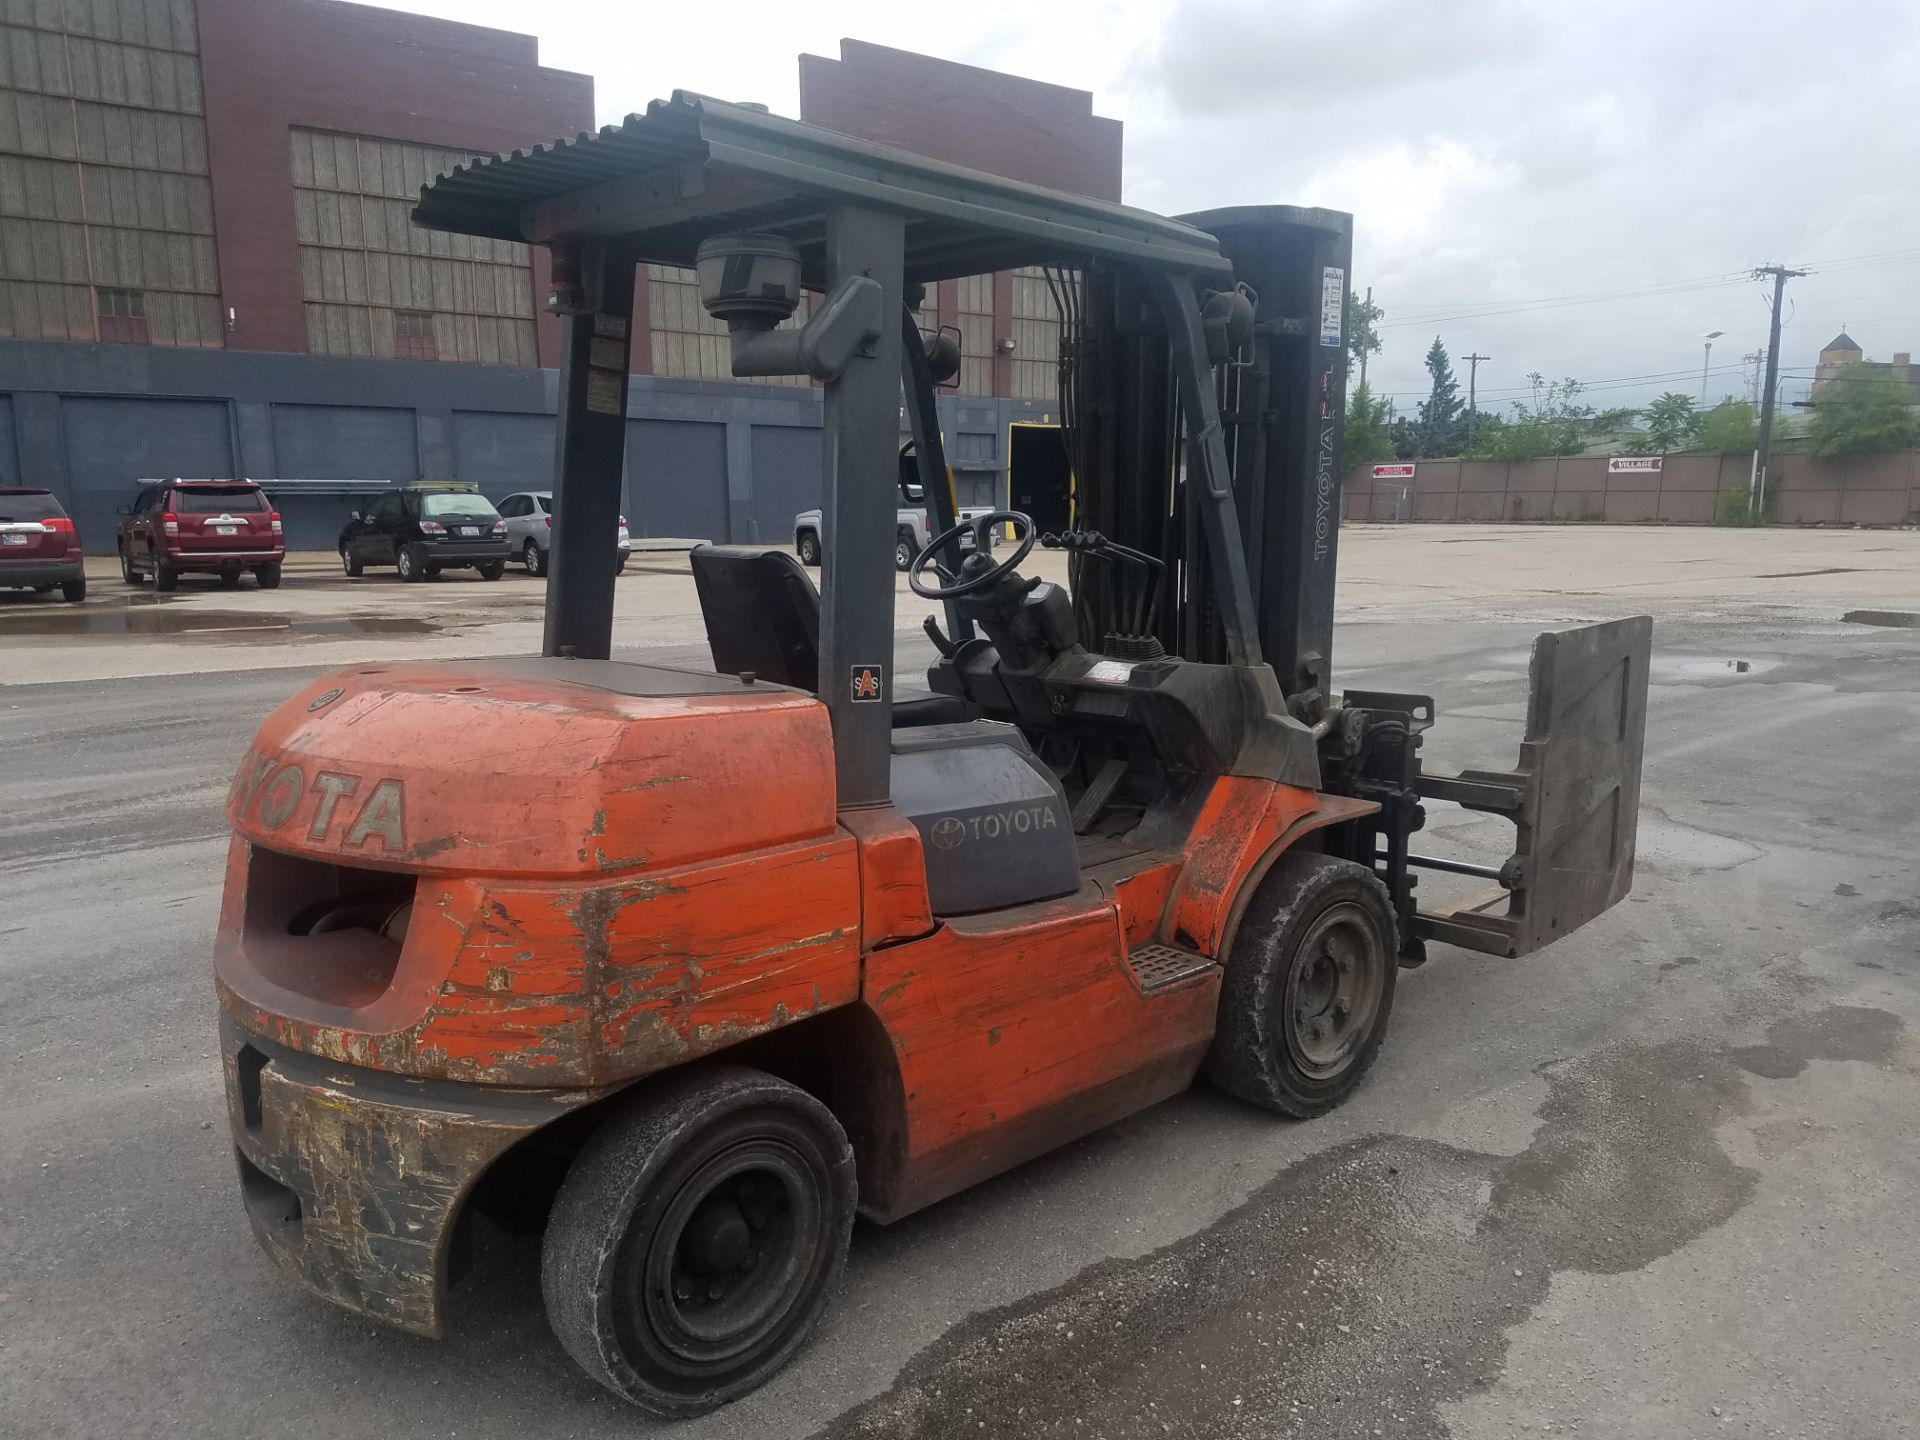 Toyota Model 7FDU35, s/n 70499, 5,000 Lb. Capacity, Diesel, Hard Tire, with Cascase Multi Clamp - Image 4 of 6